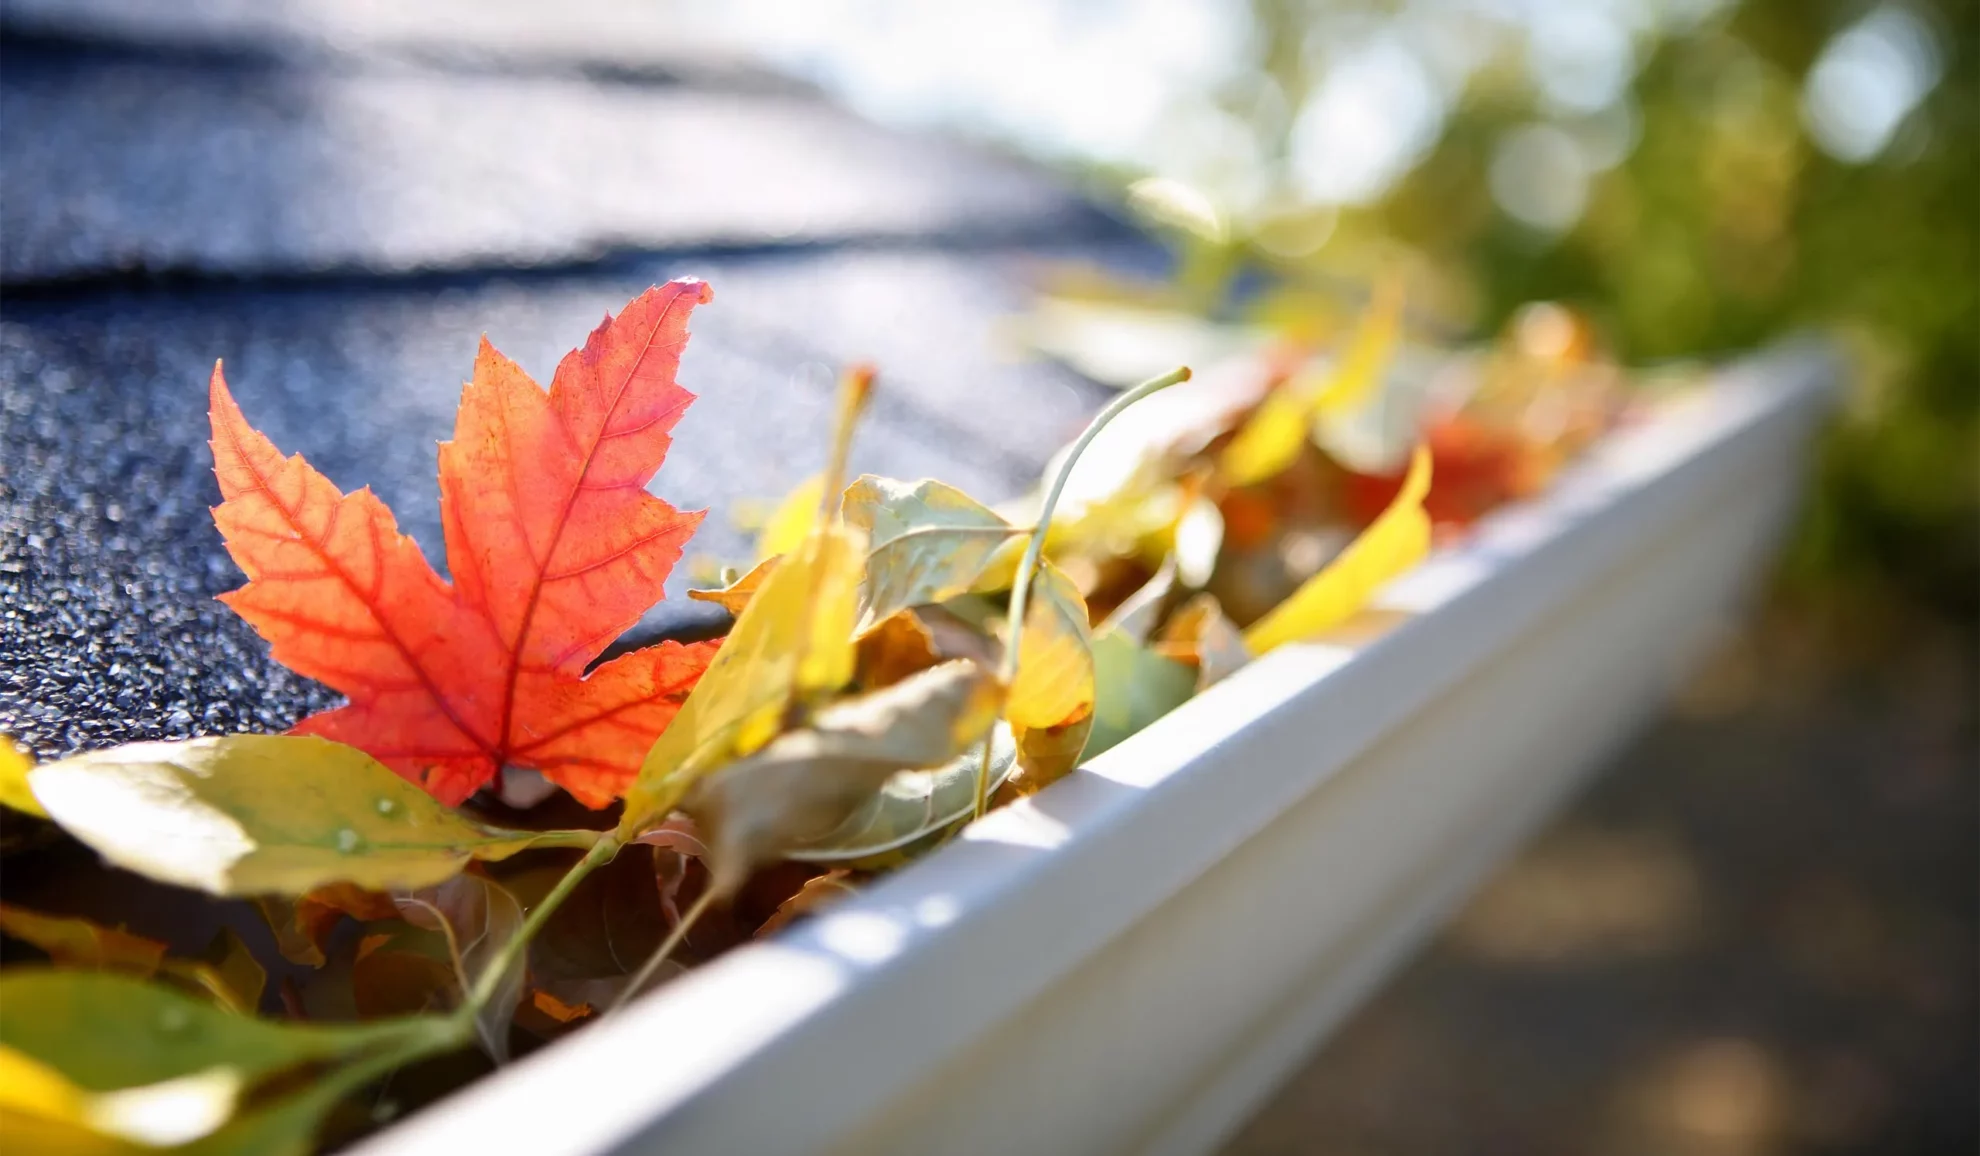 house gutter close up full of autumn leaves canton ms